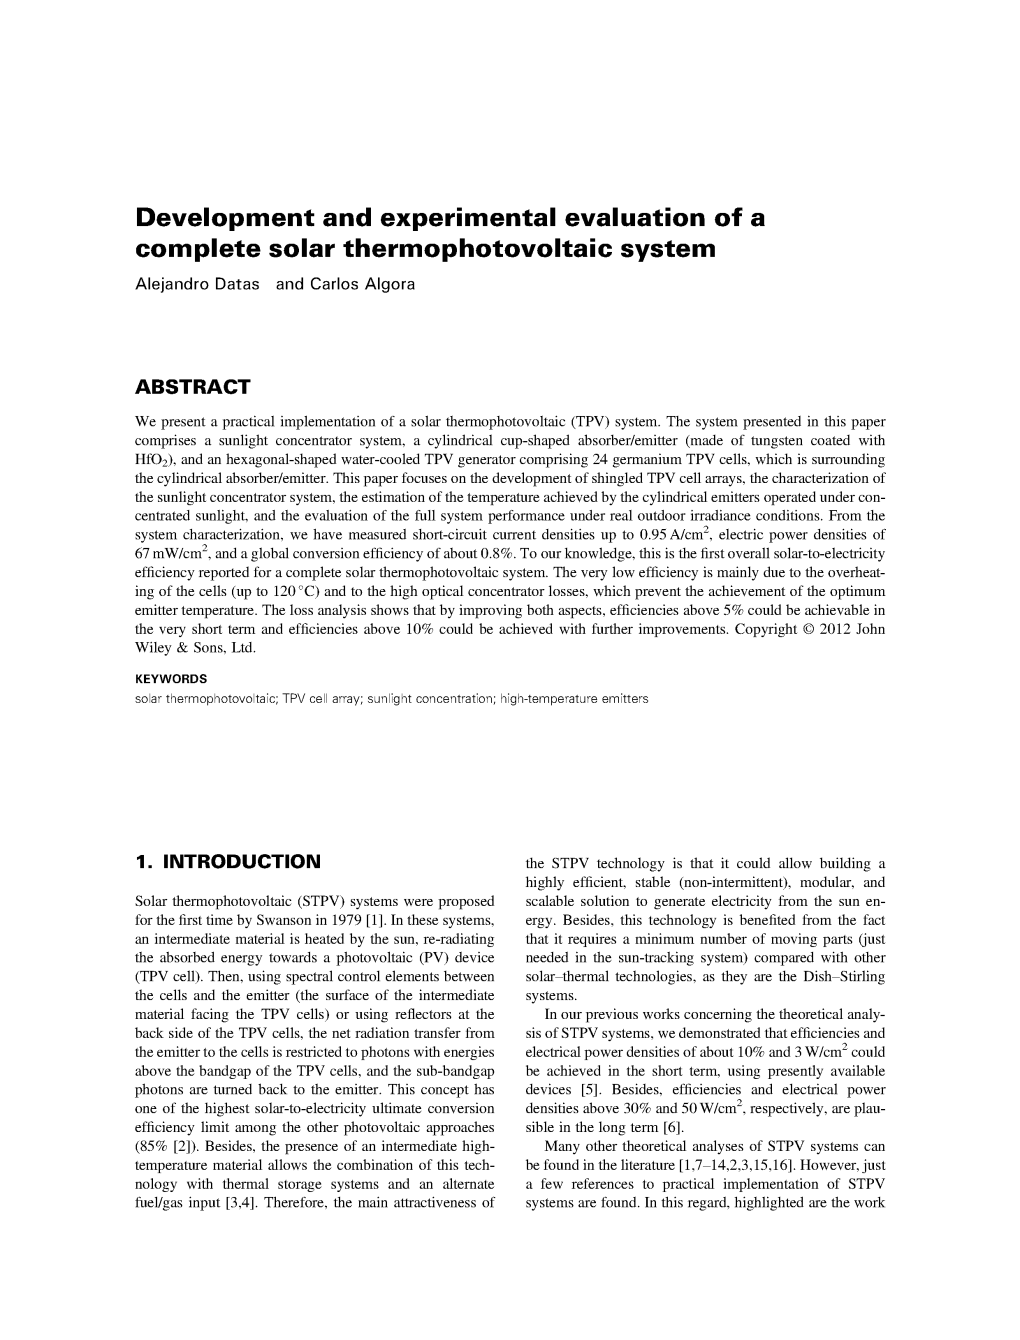 Development and Experimental Evaluation of a Complete Solar Thermophotovoltaic System Alejandro Datas and Carlos Algora